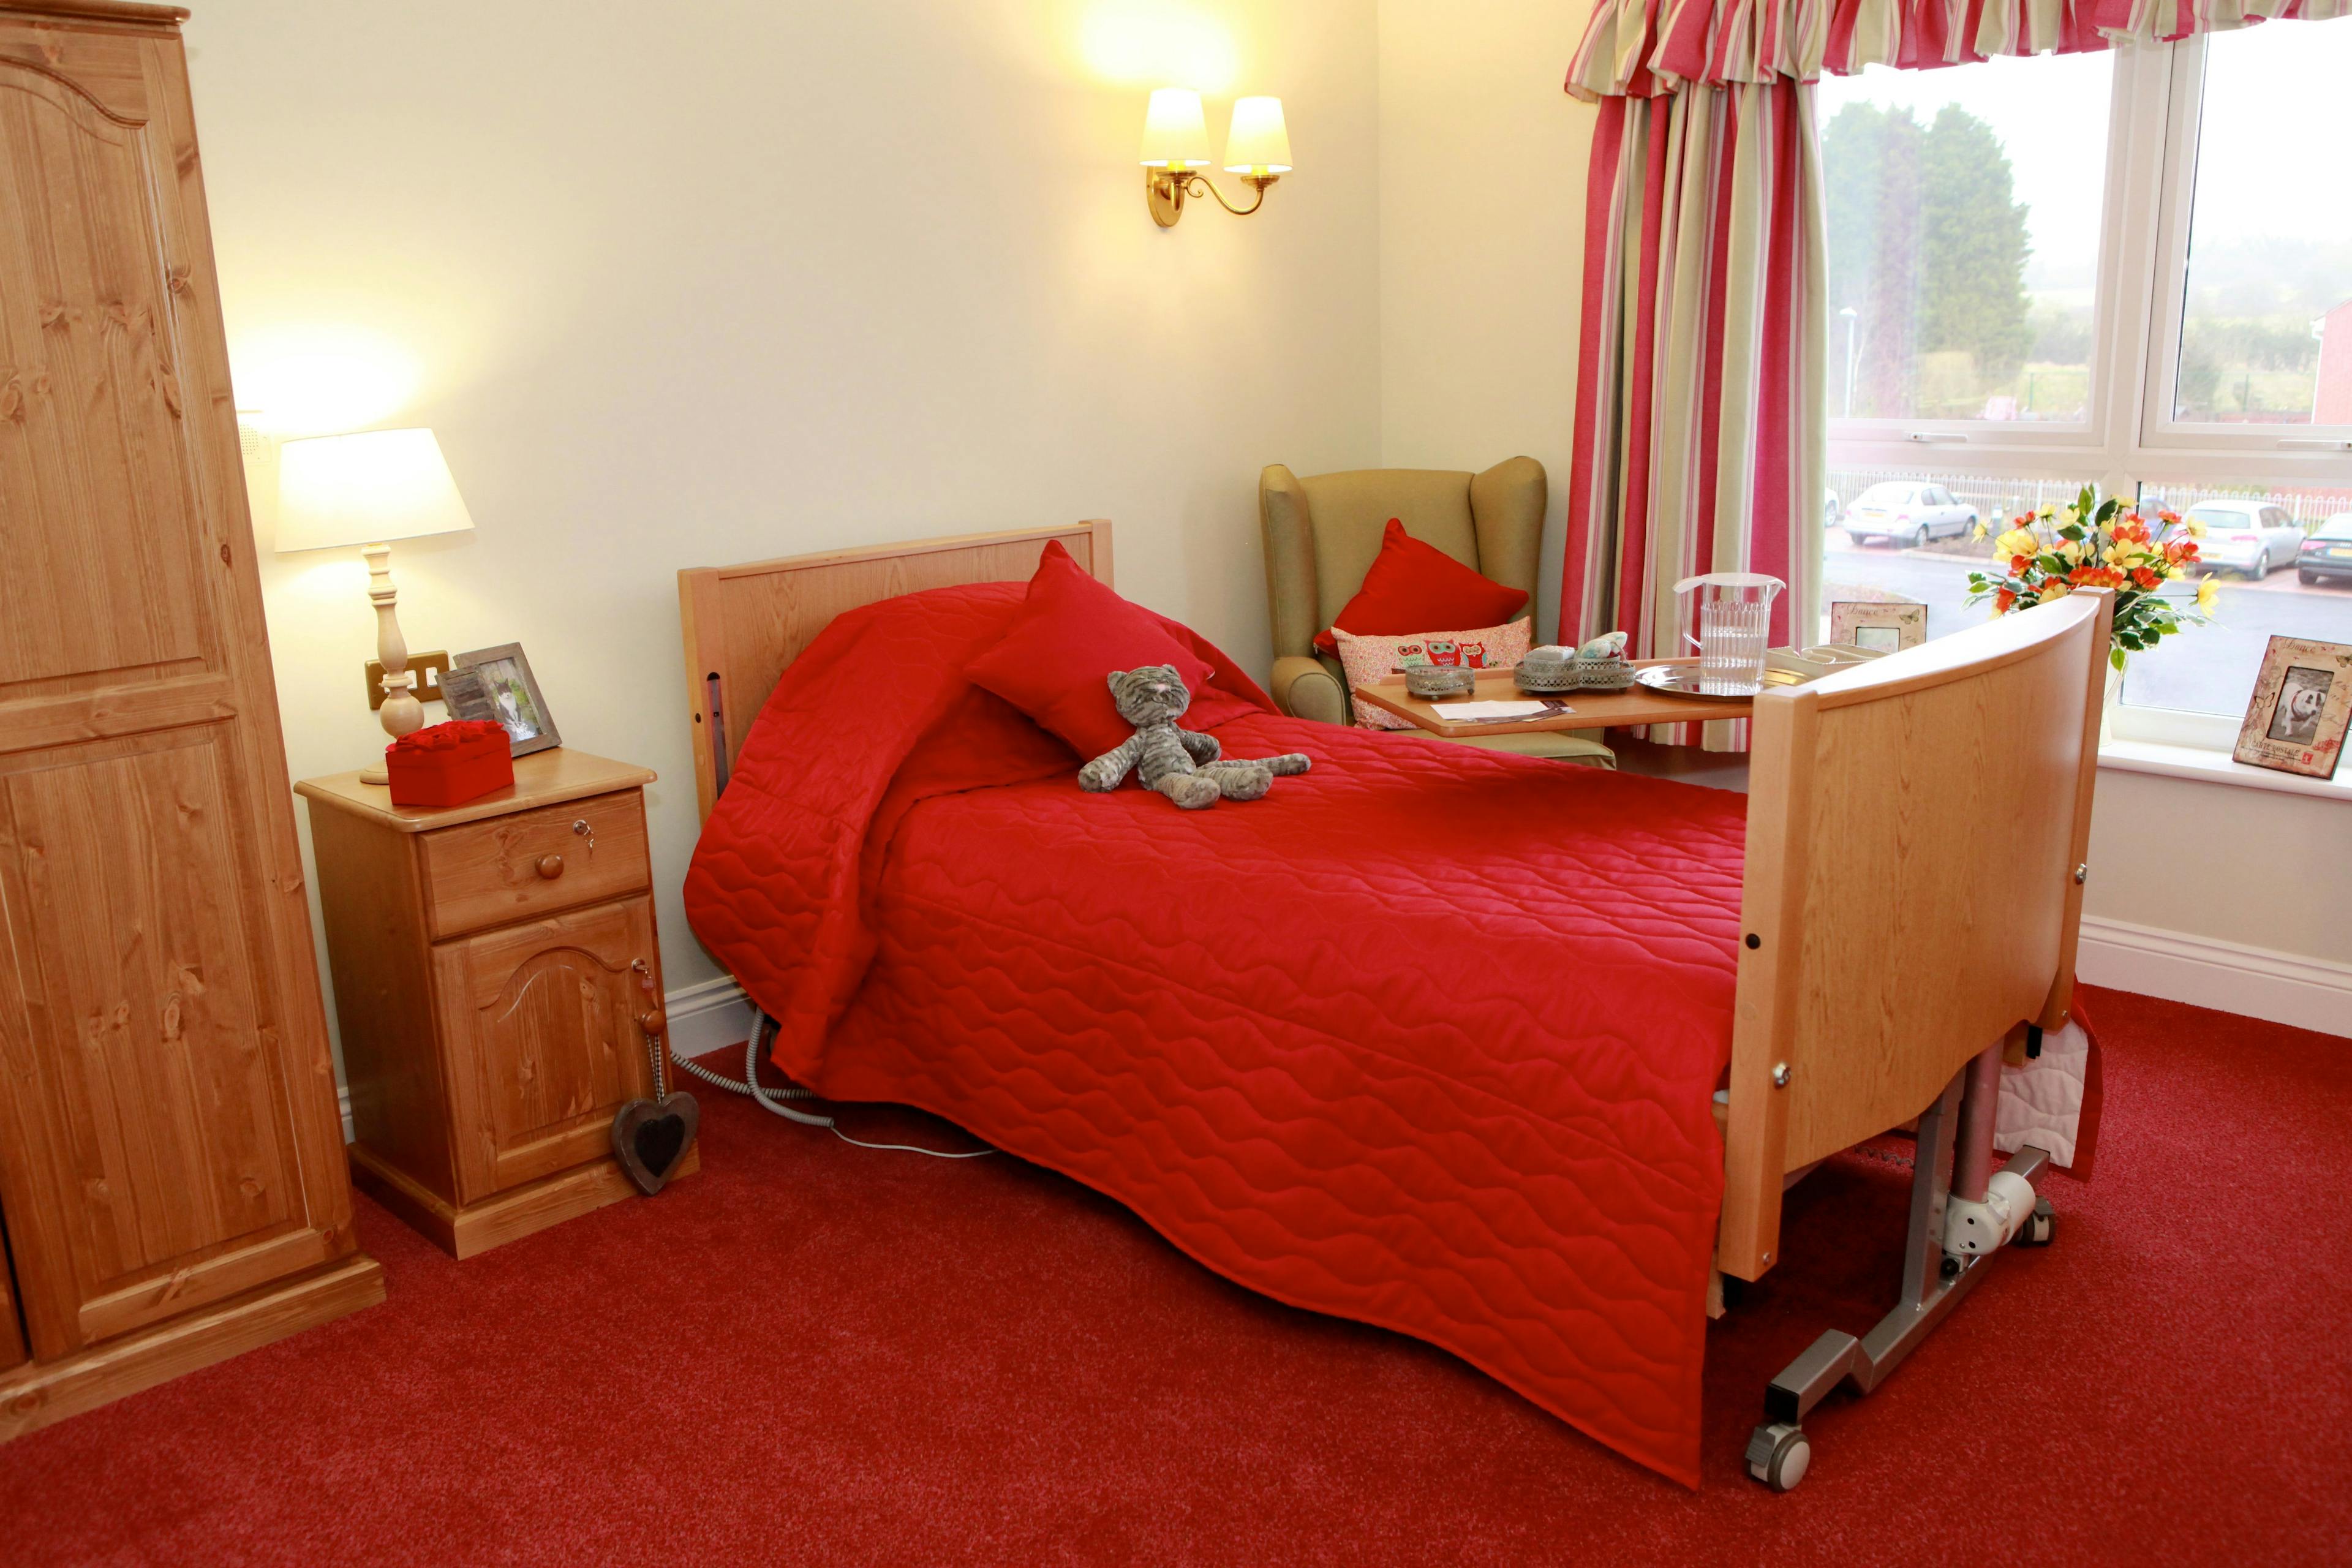 Bedroom of Latimer Court Care Home in Worcester, Worcestershire 